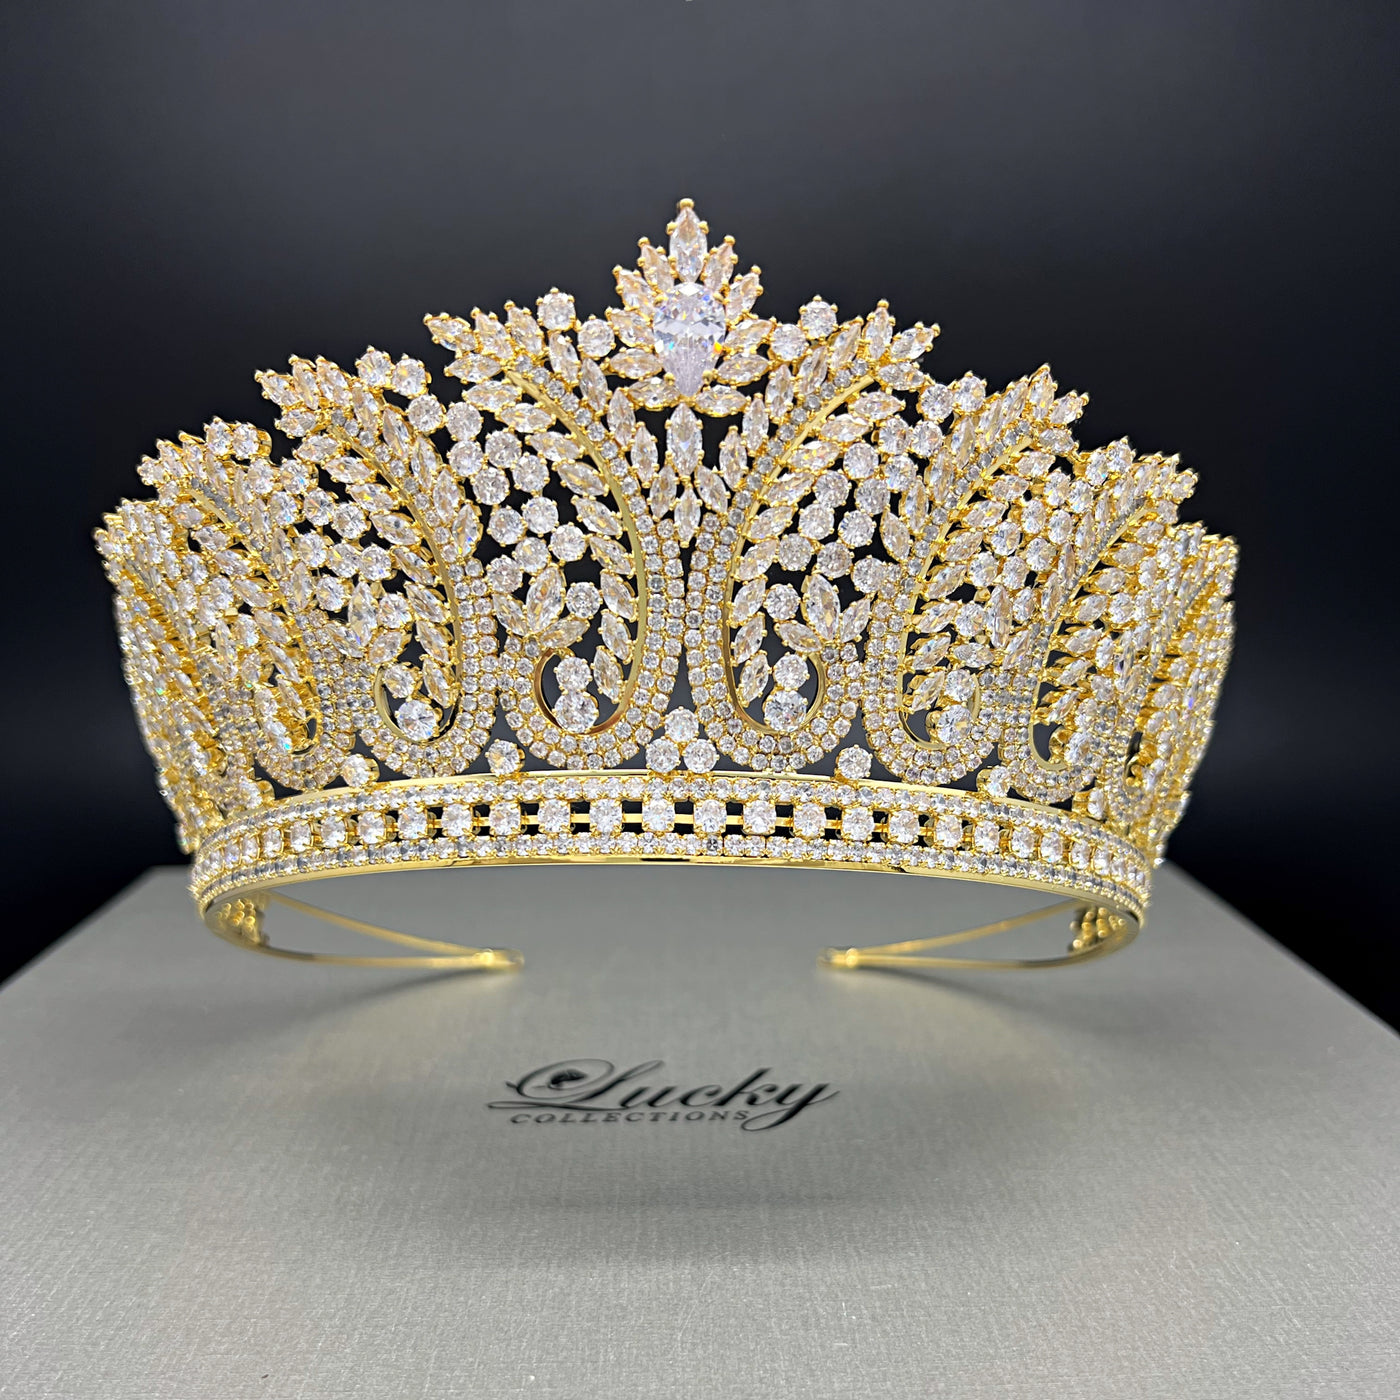 15 Anos Tiara, Zirconia Gems, Worth Boasting About by Lucky Collections ™